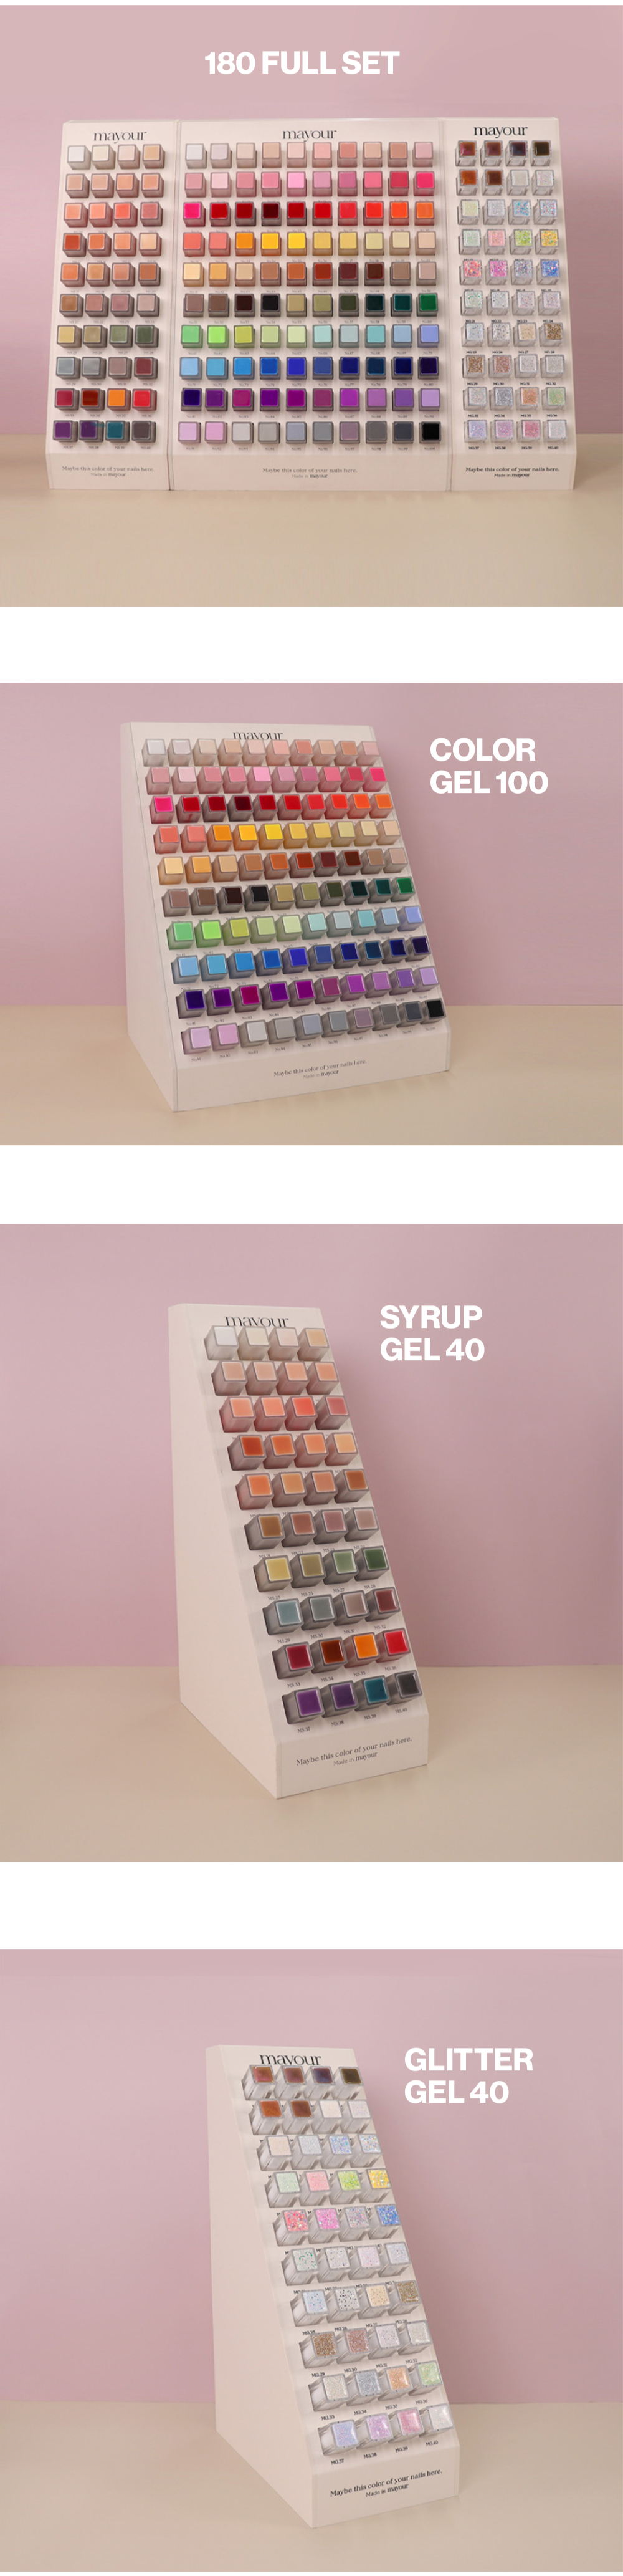 mayour 180 color full set